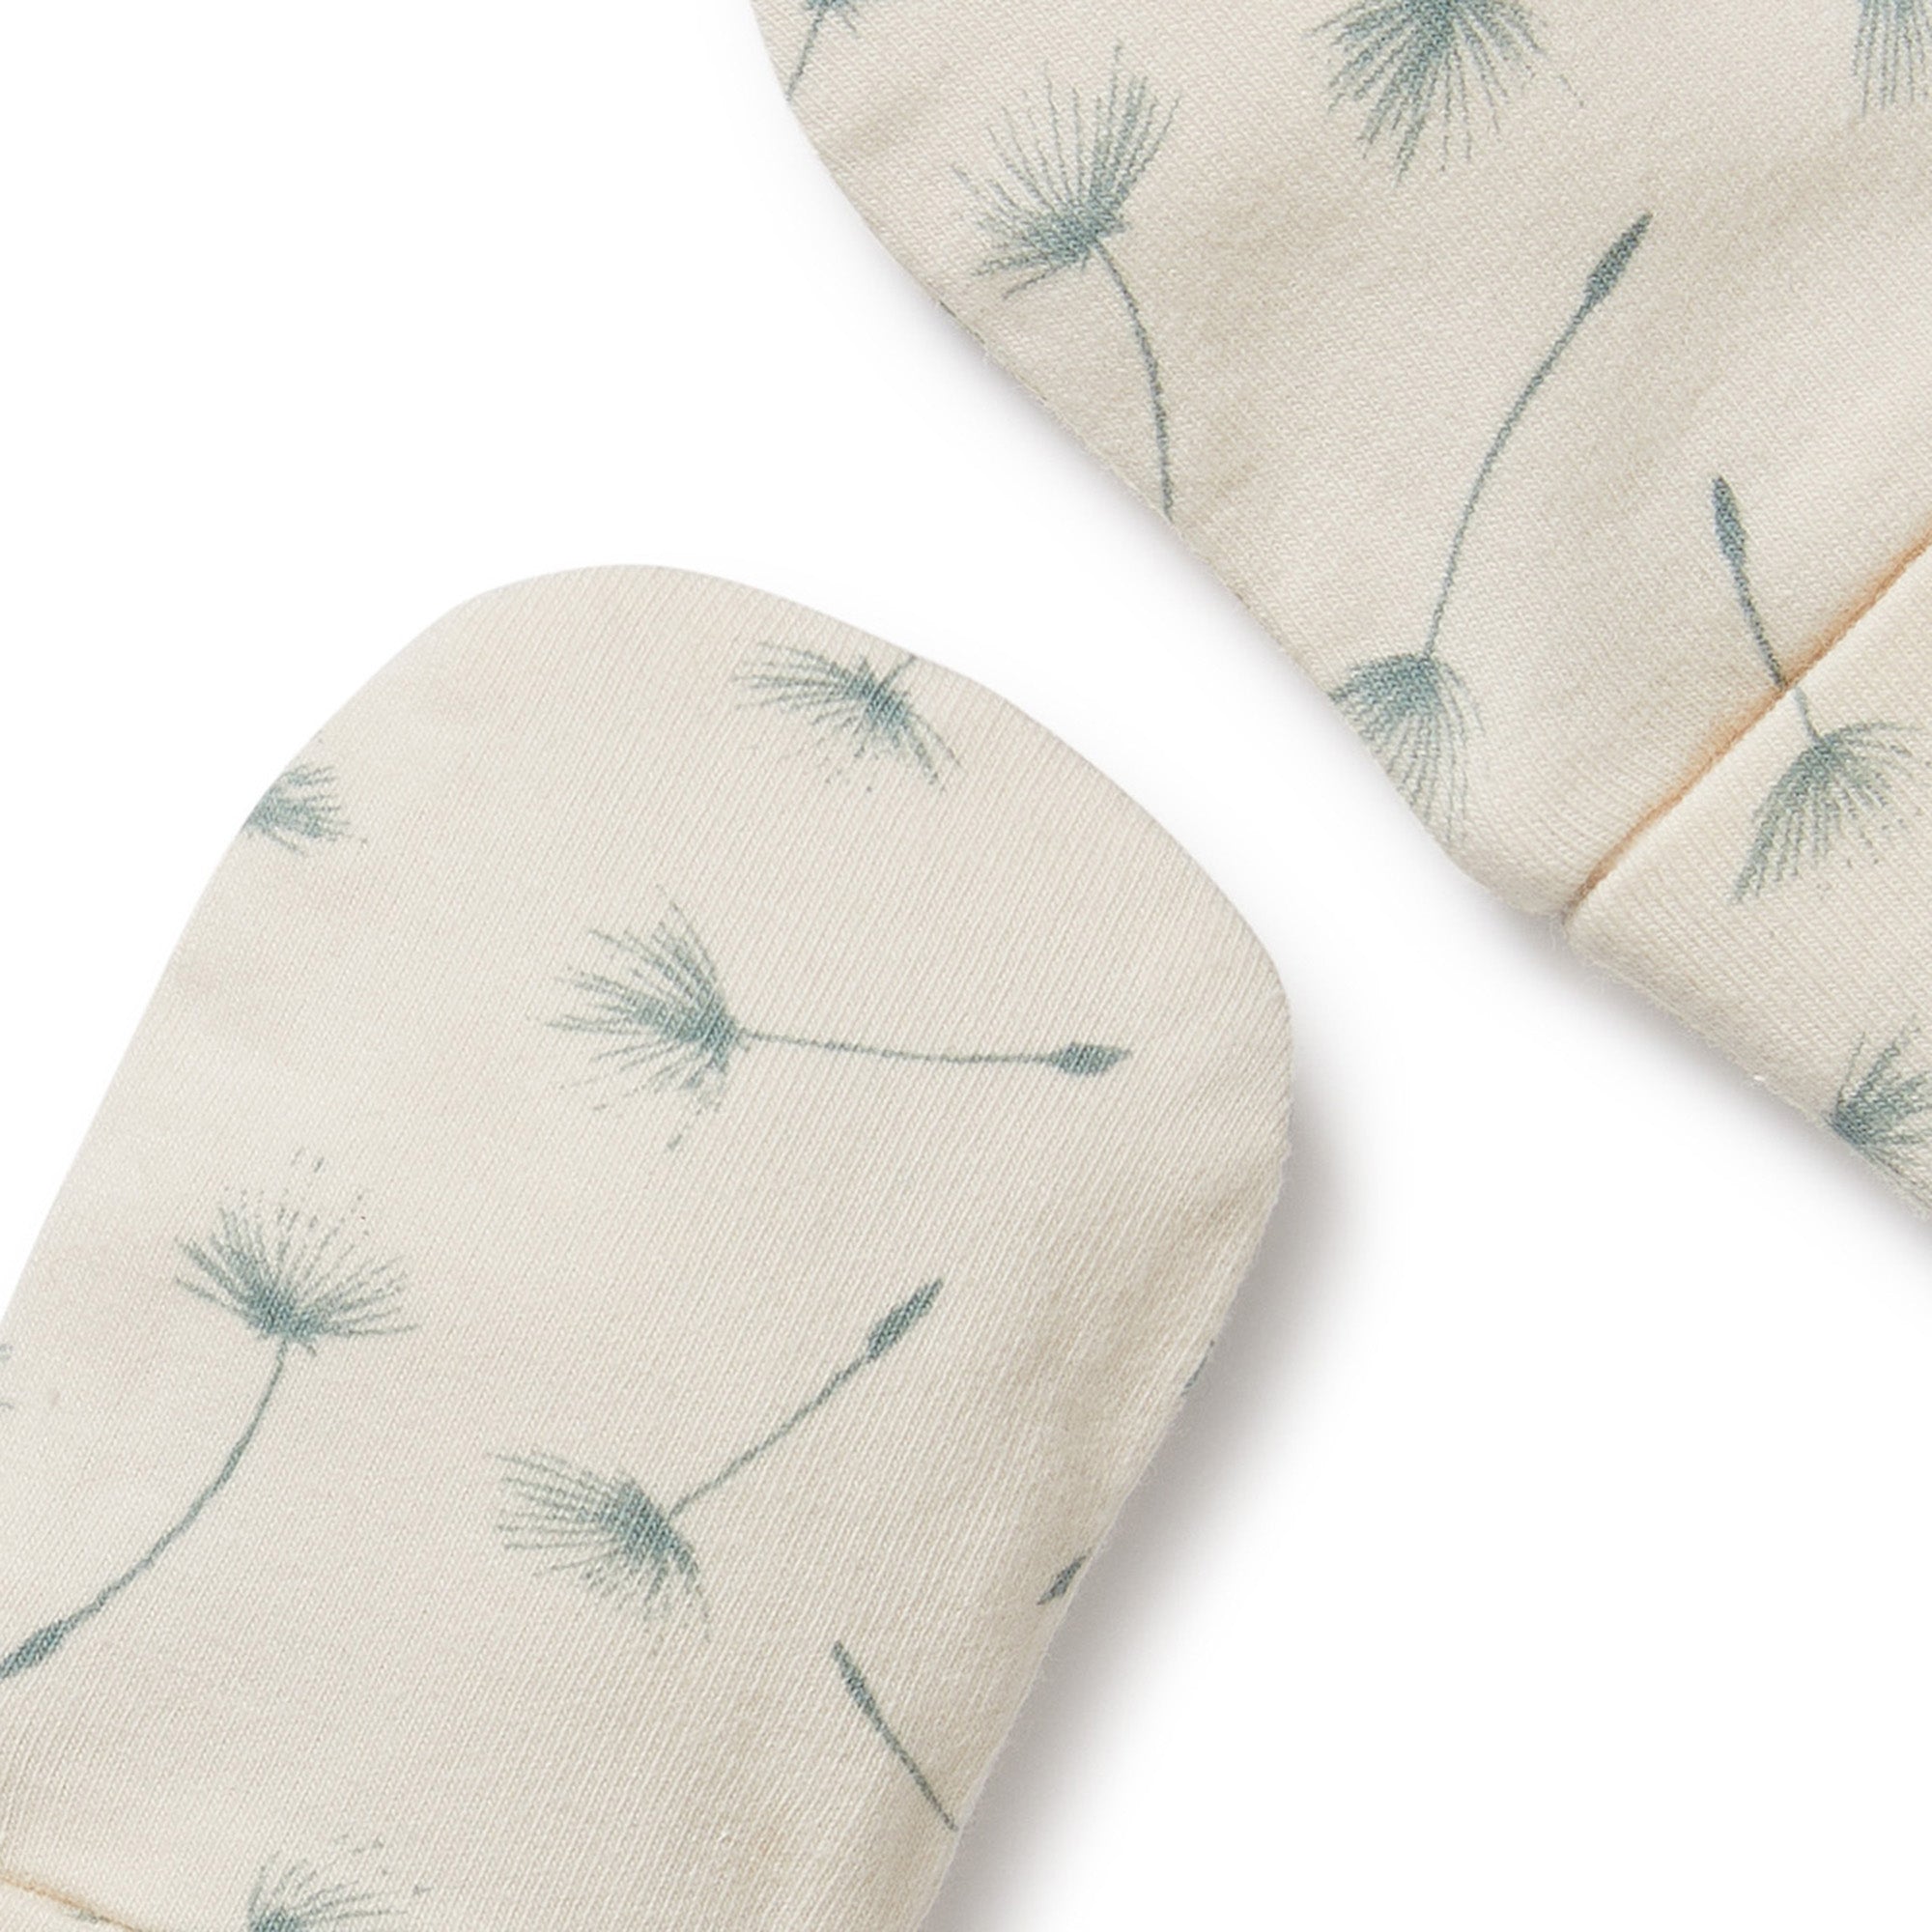 Wilson & Frenchy - Float Away Organic Mittens